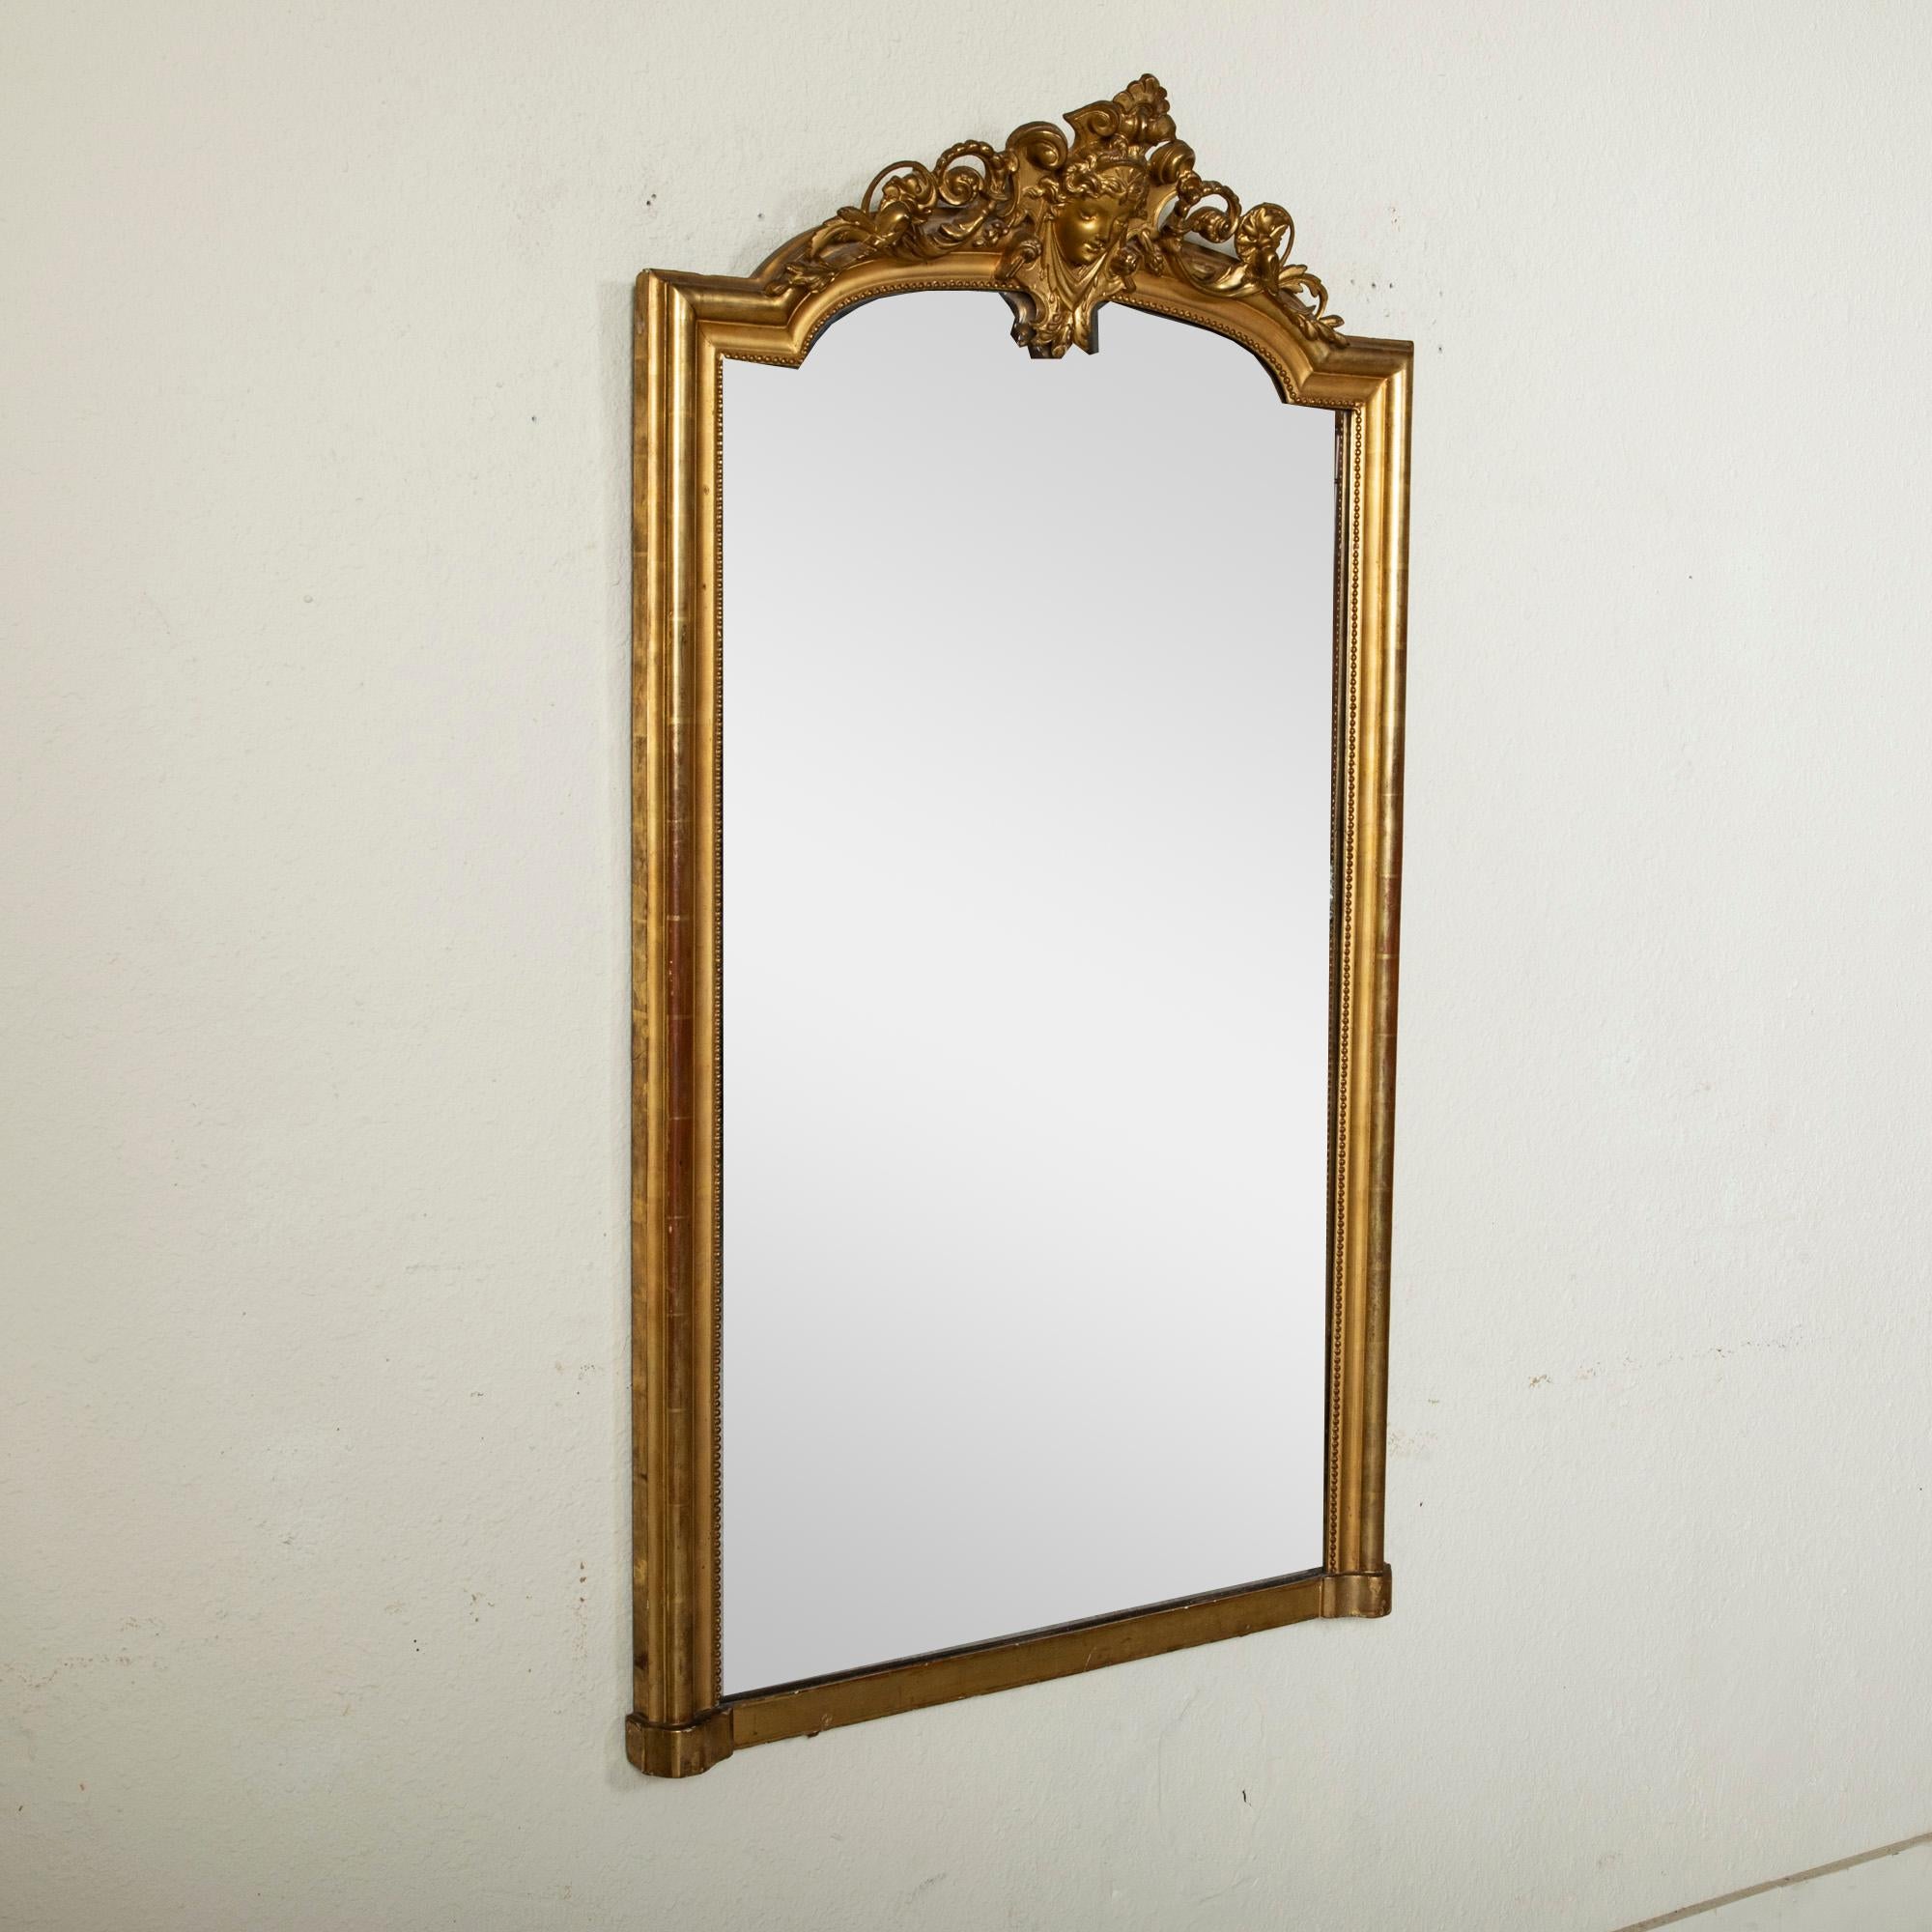 Mid-19th Century Napoleon III Period French Gilt Wood Mantel Mirror with Mask For Sale 1